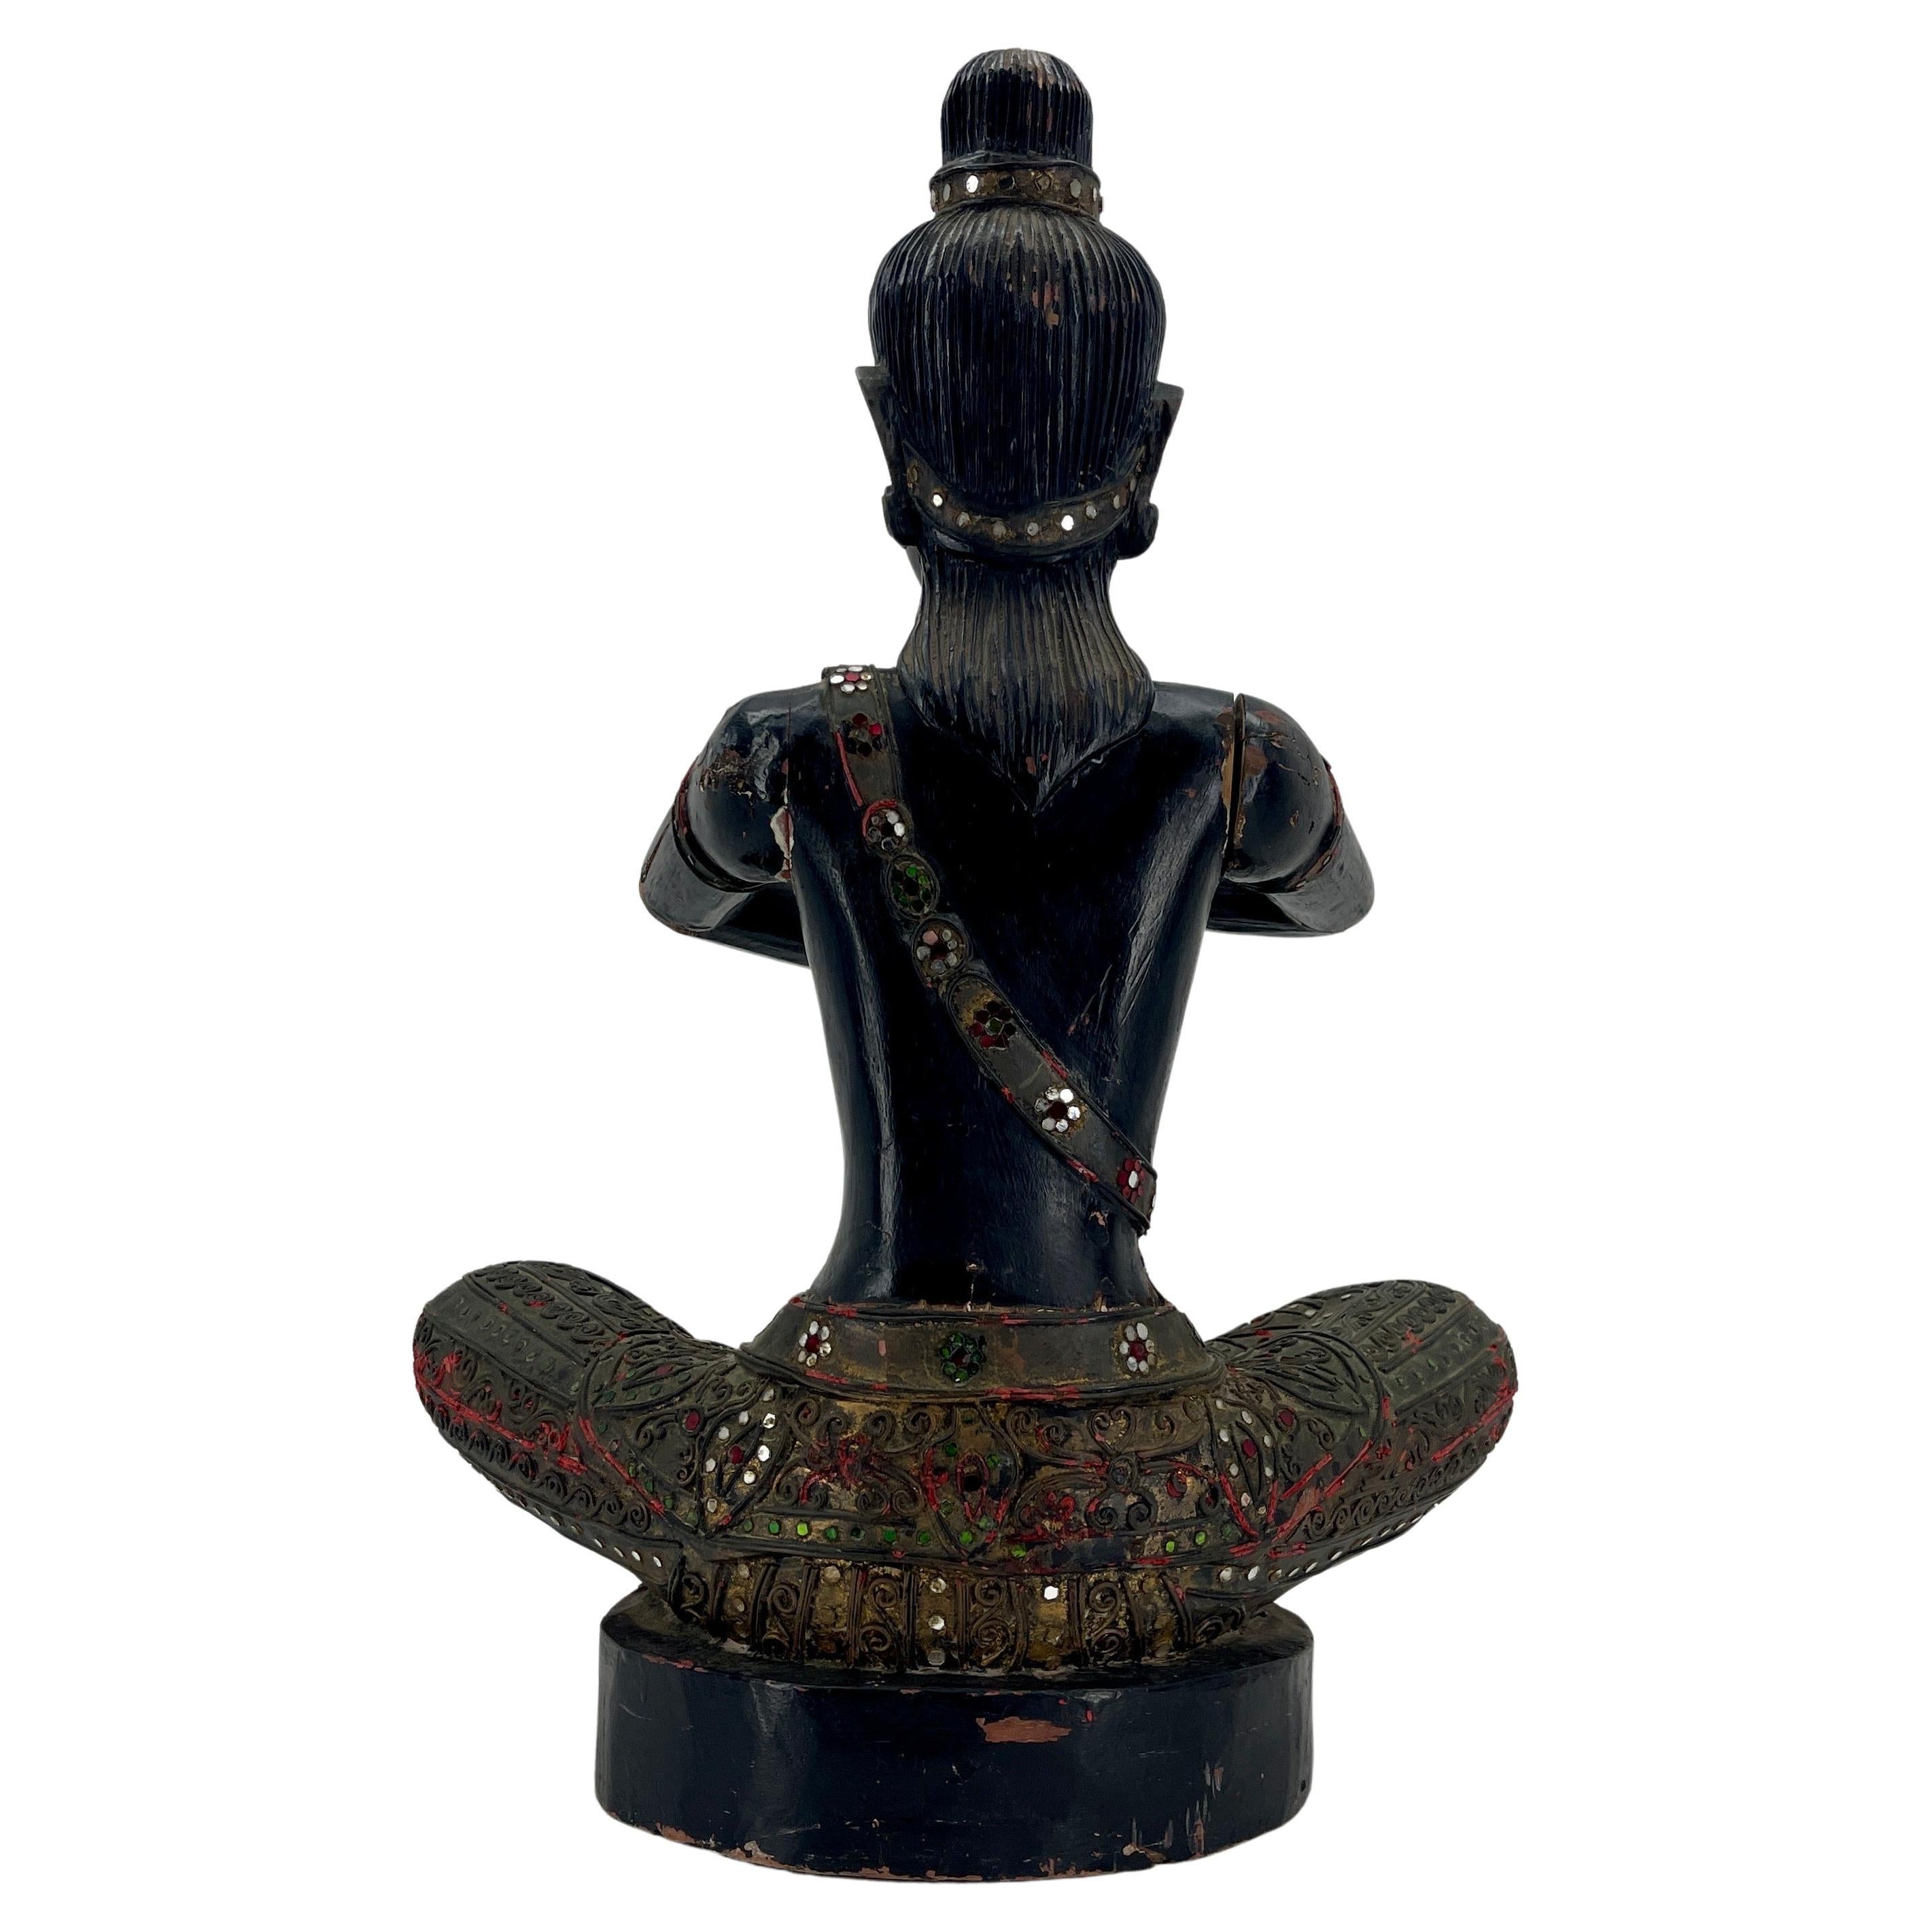 Large Cambodian Black Painted Sitting Buddha Sculpture, circa 1920s For Sale 1